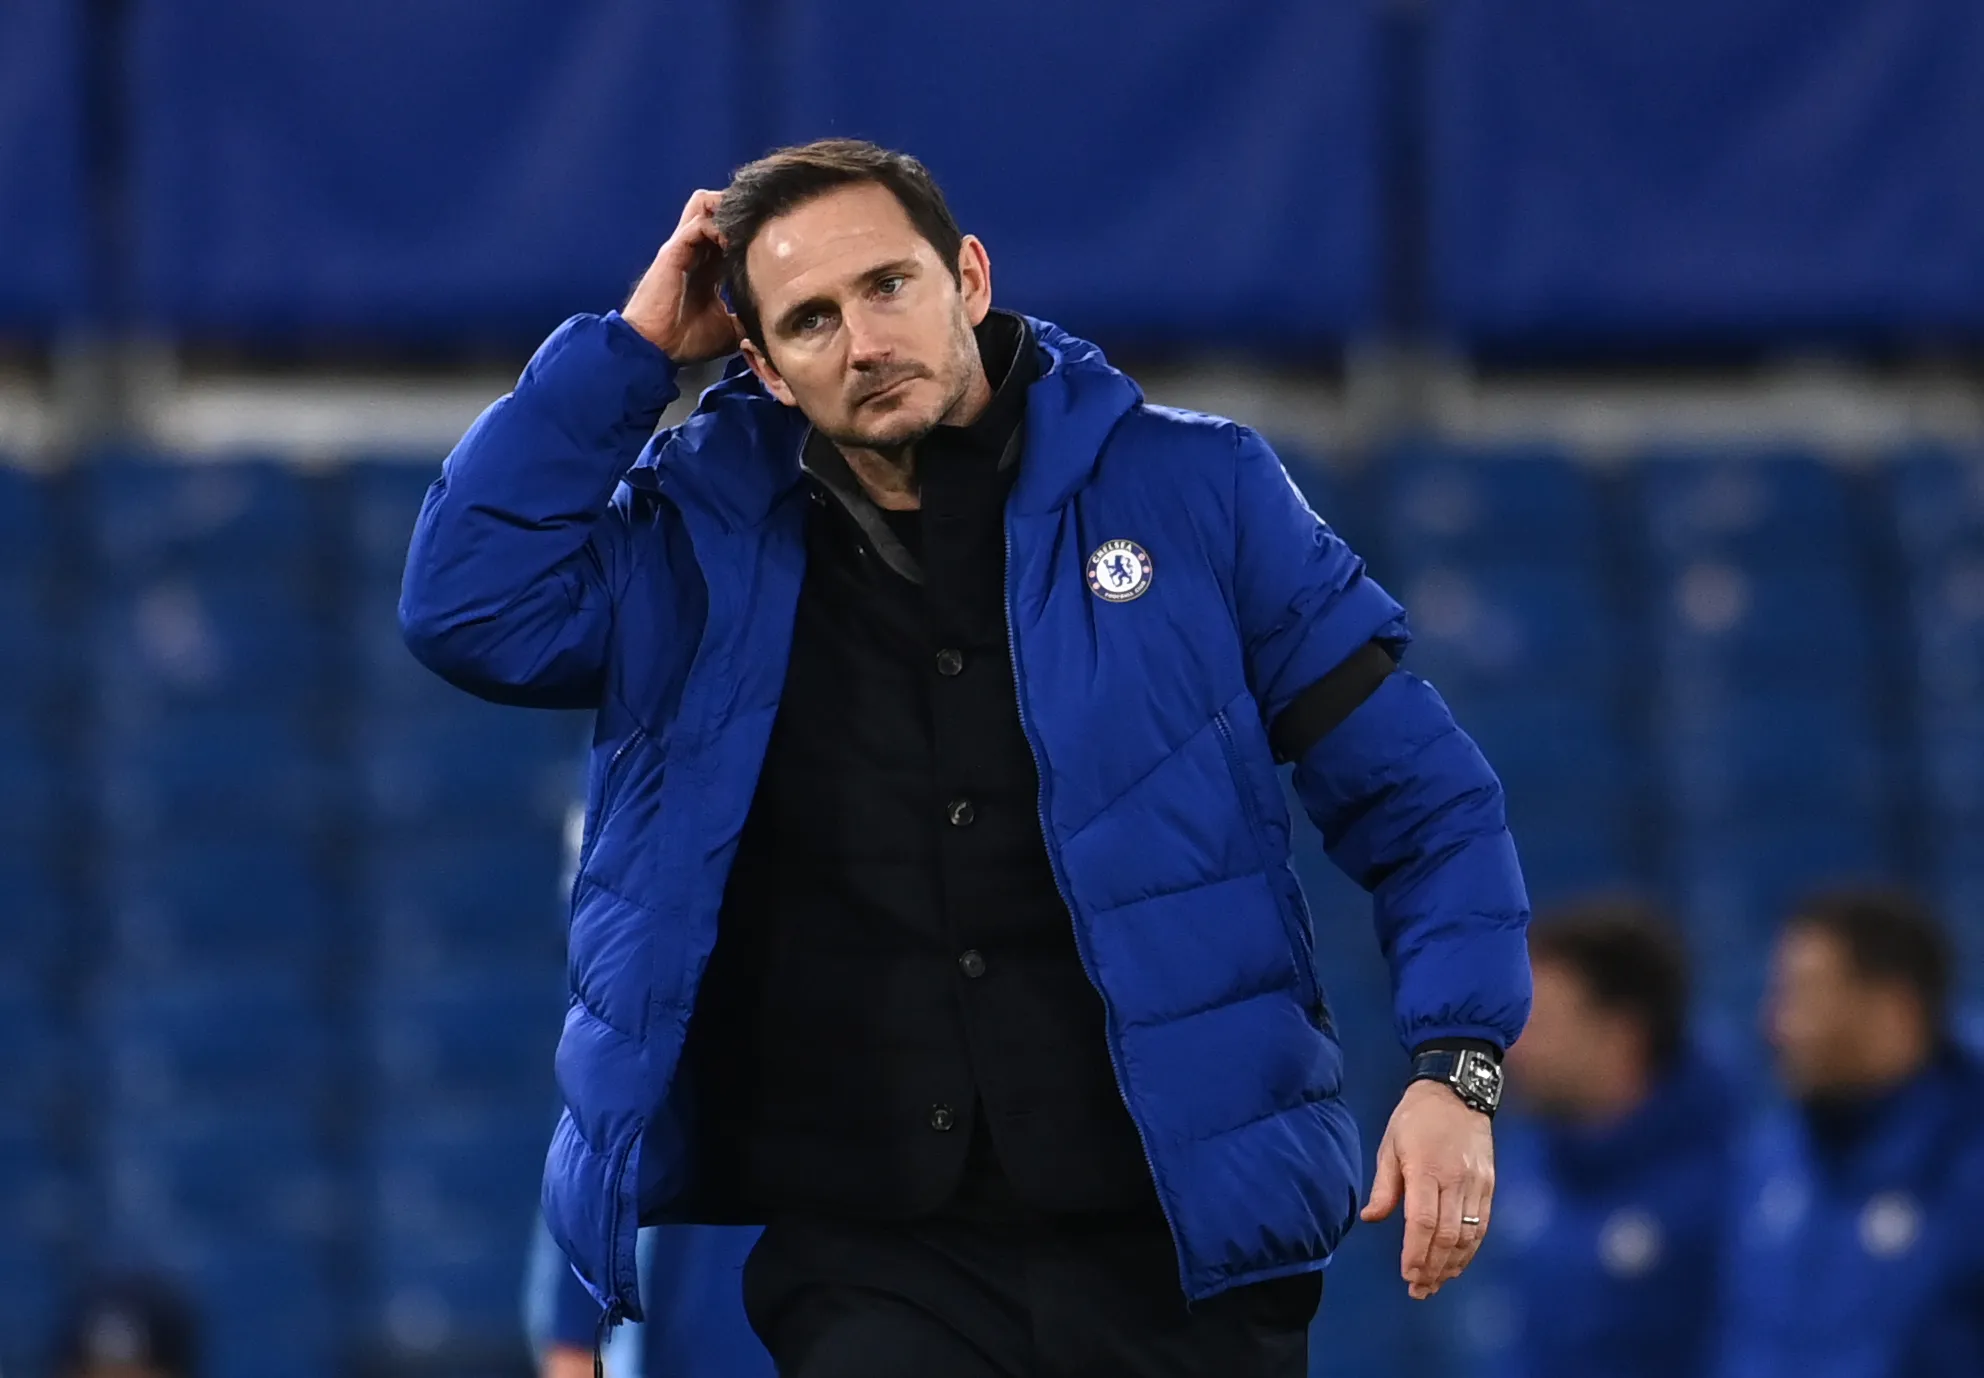 Former Chelsea player and manager Frank Lampard is the latest to be linked to Everton